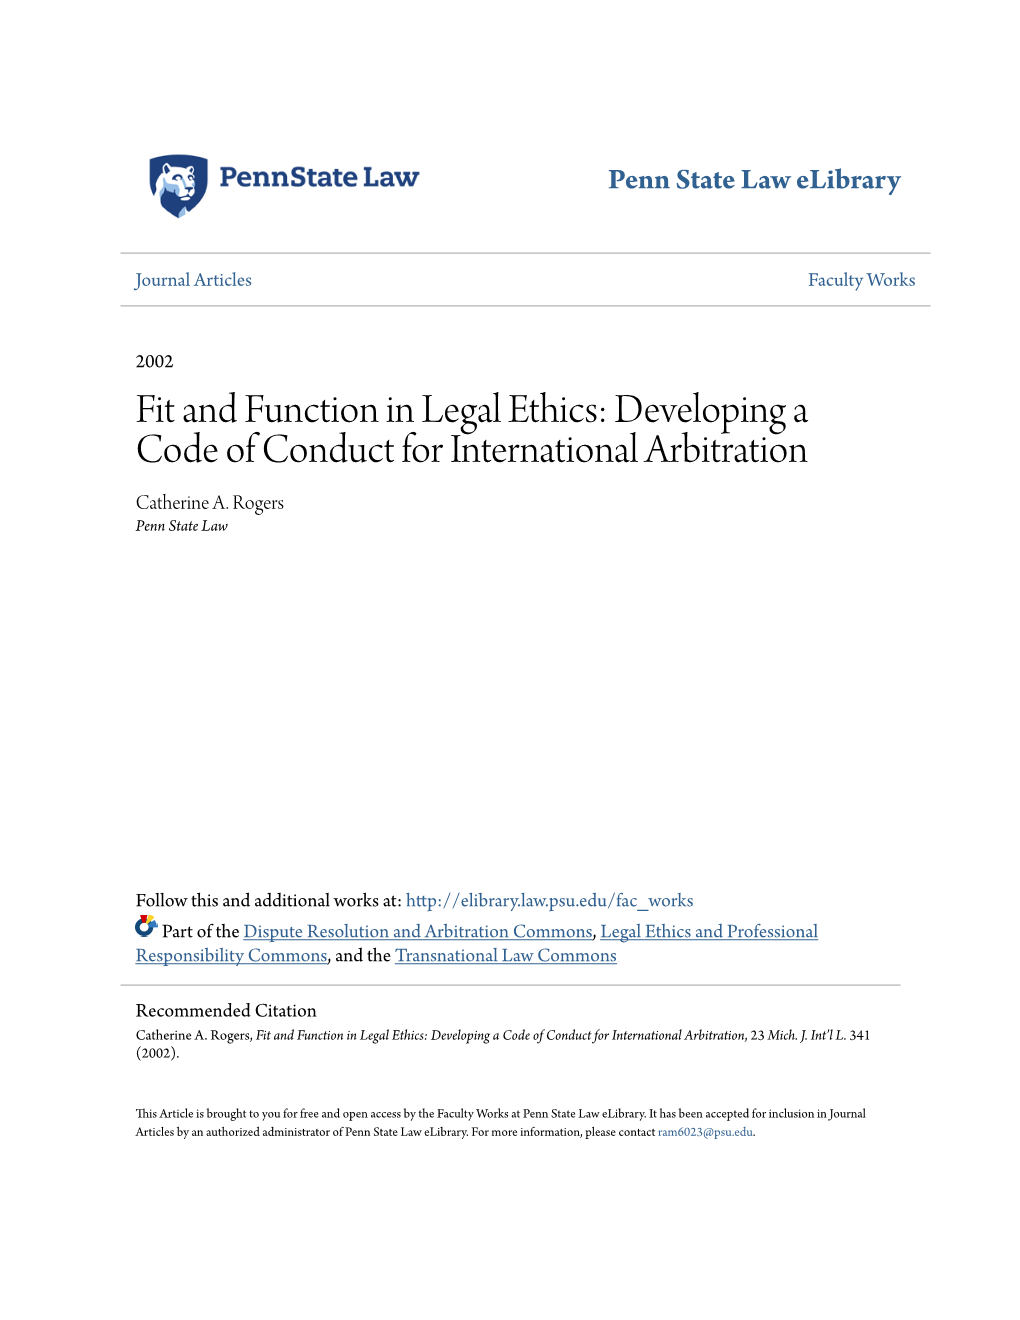 Fit and Function in Legal Ethics: Developing a Code of Conduct for International Arbitration Catherine A